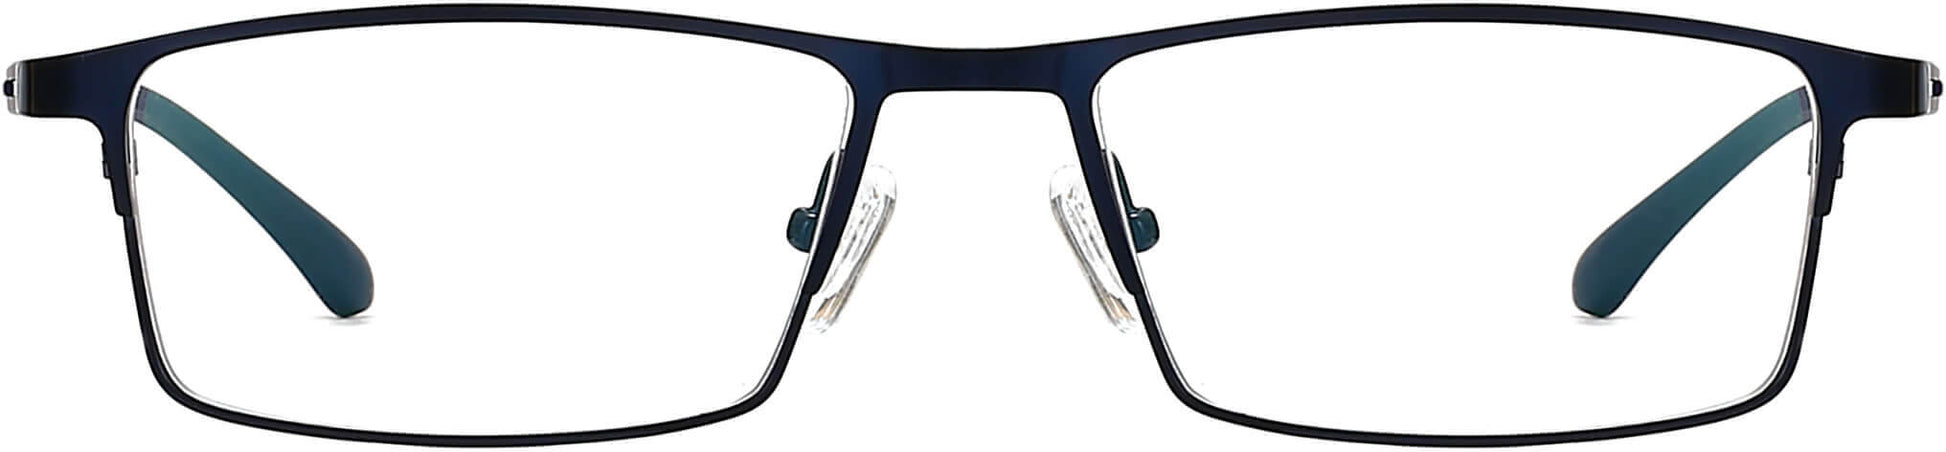 Trent Rectangle Blue Eyeglasses from ANRRI, front view